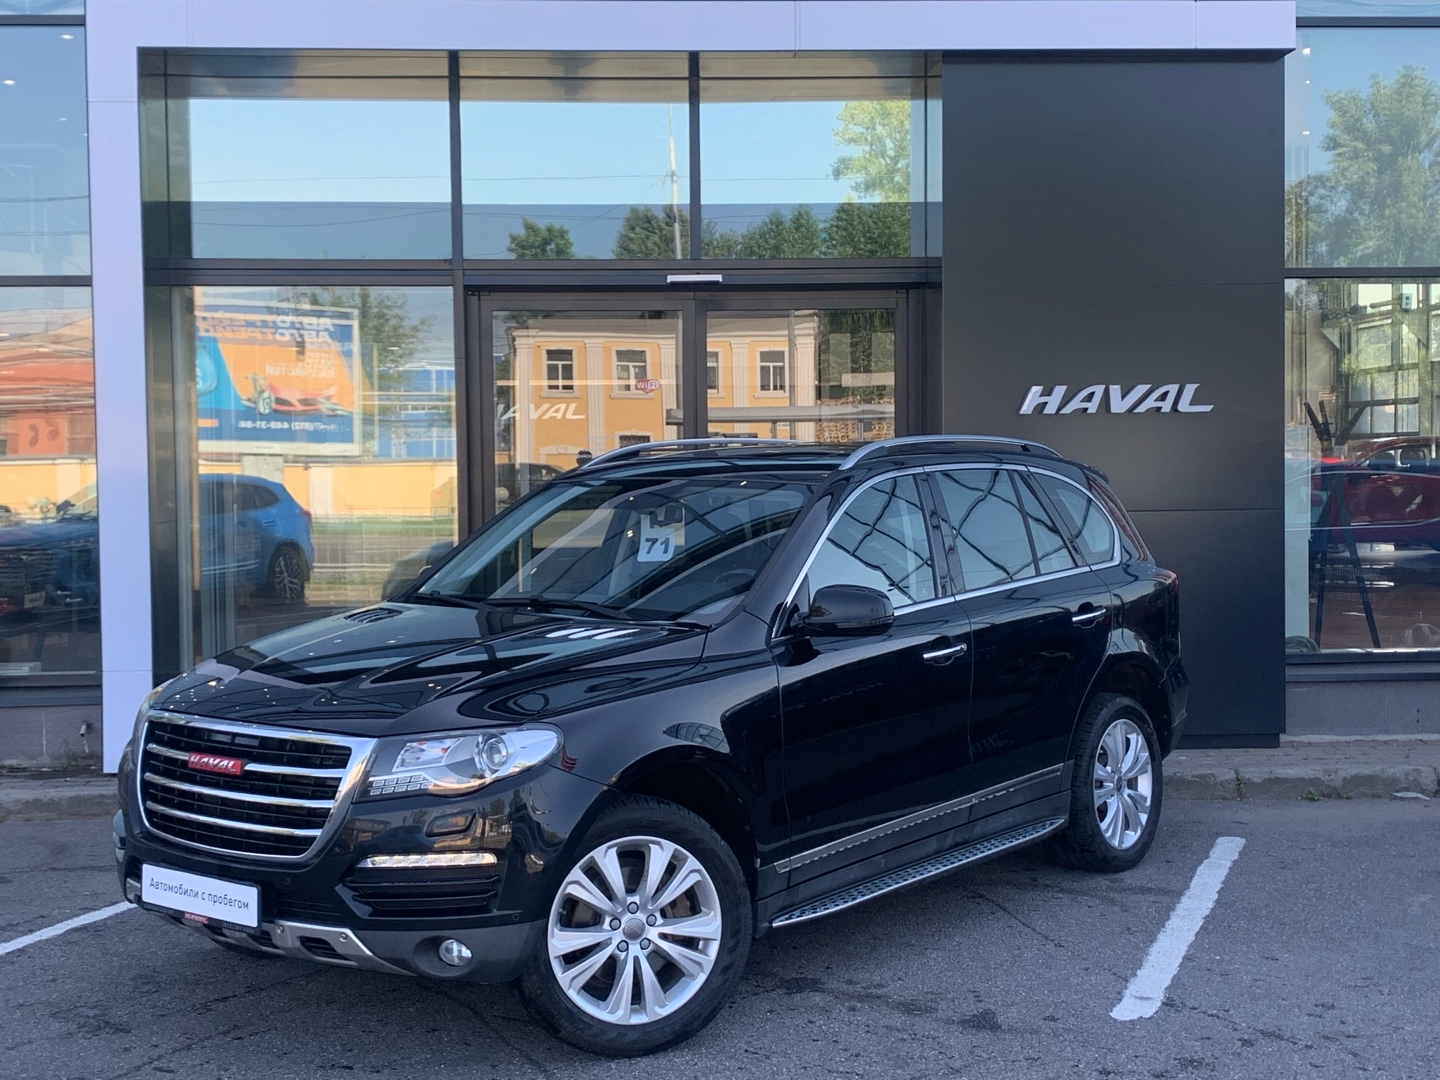 Haval H8, 2015, VIN: LGWFF6A76FH623213